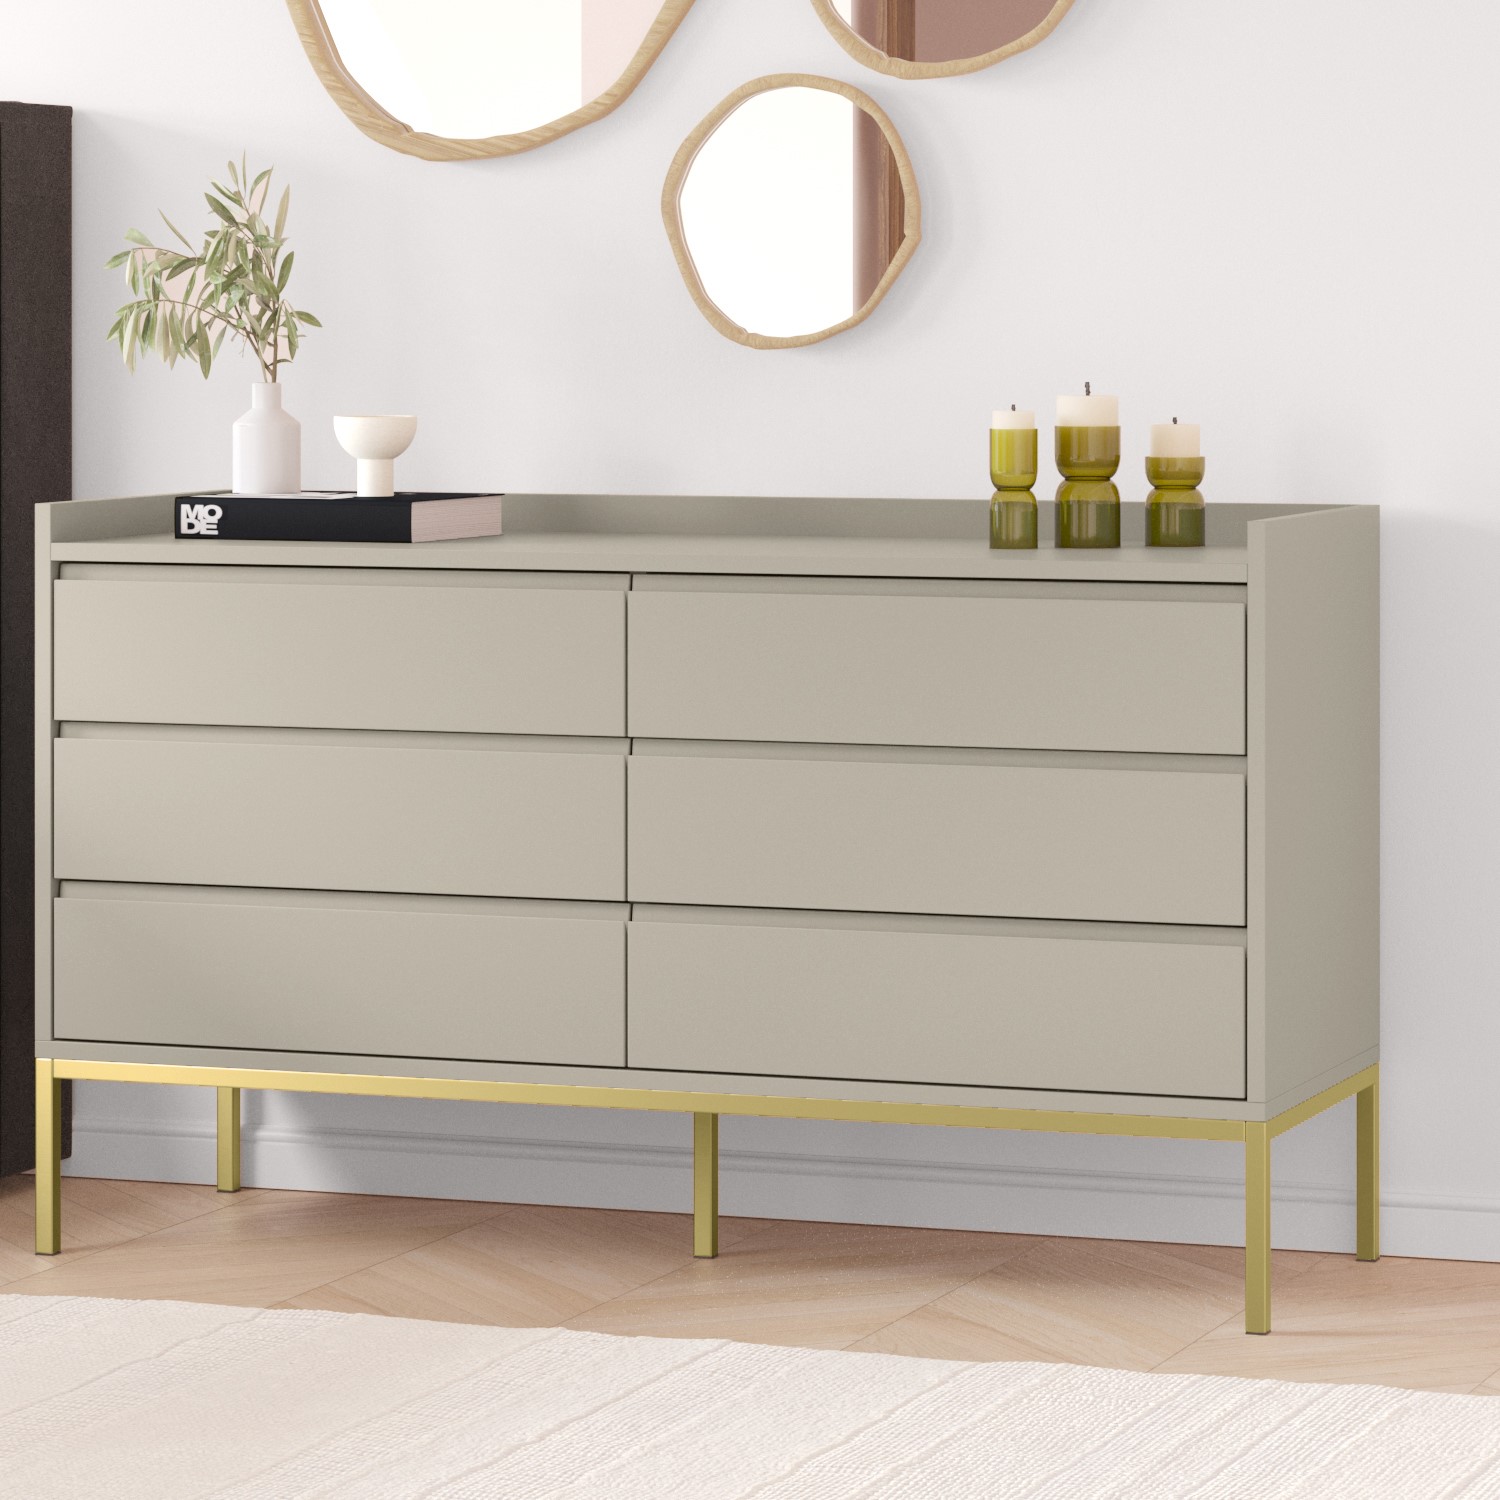 Photo of Wide beige modern chest of 6 drawers with legs - zion